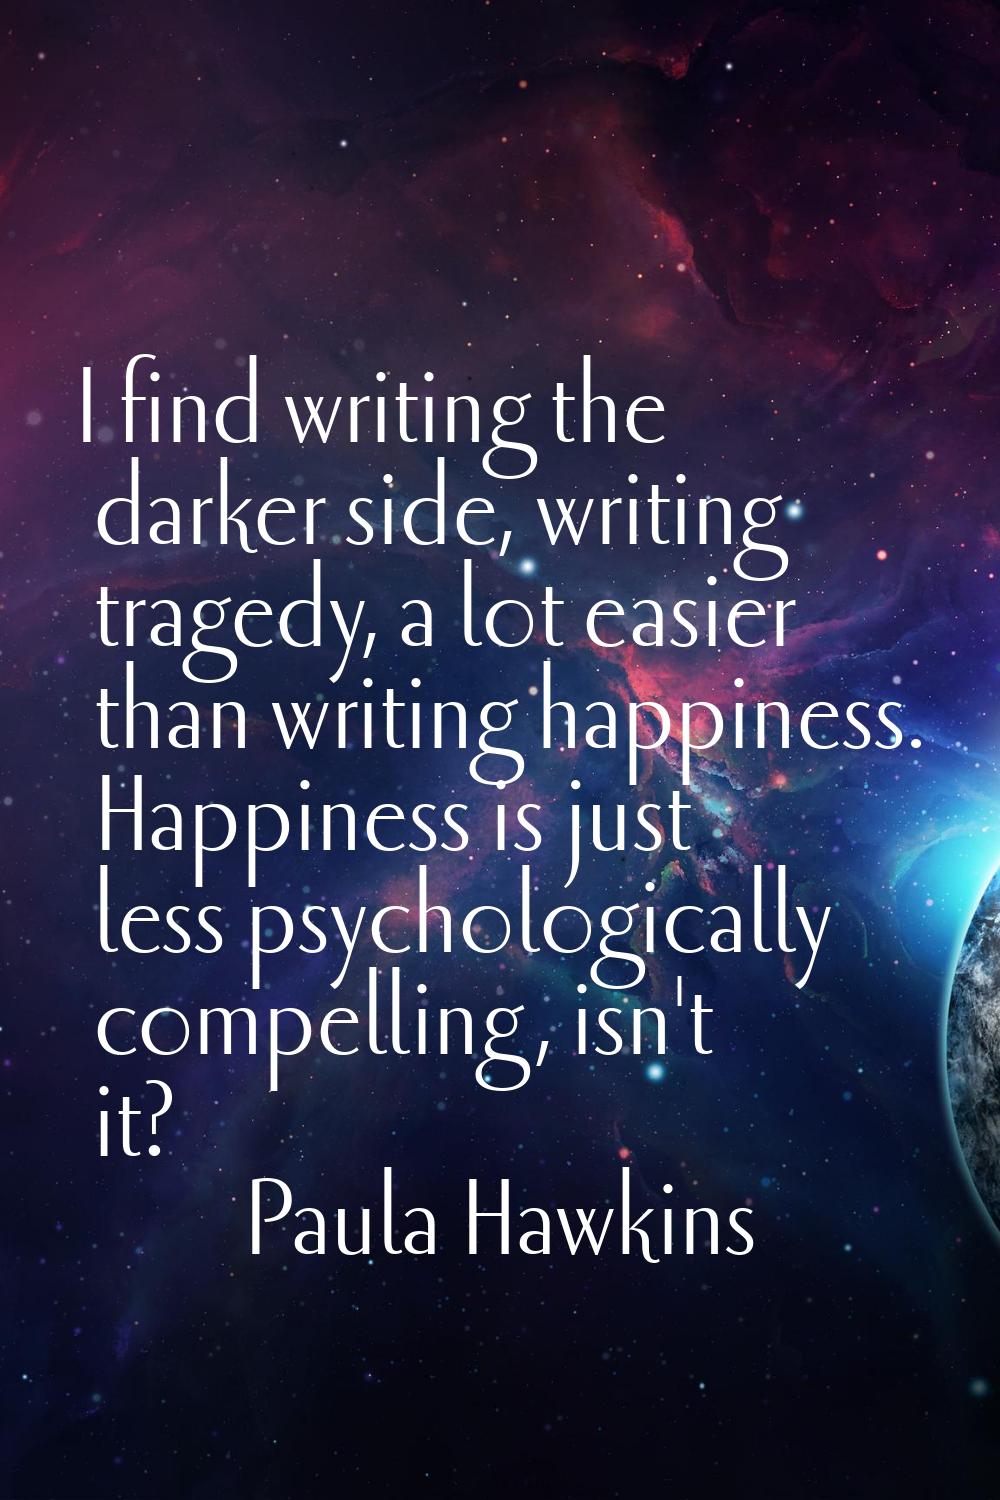 I find writing the darker side, writing tragedy, a lot easier than writing happiness. Happiness is 